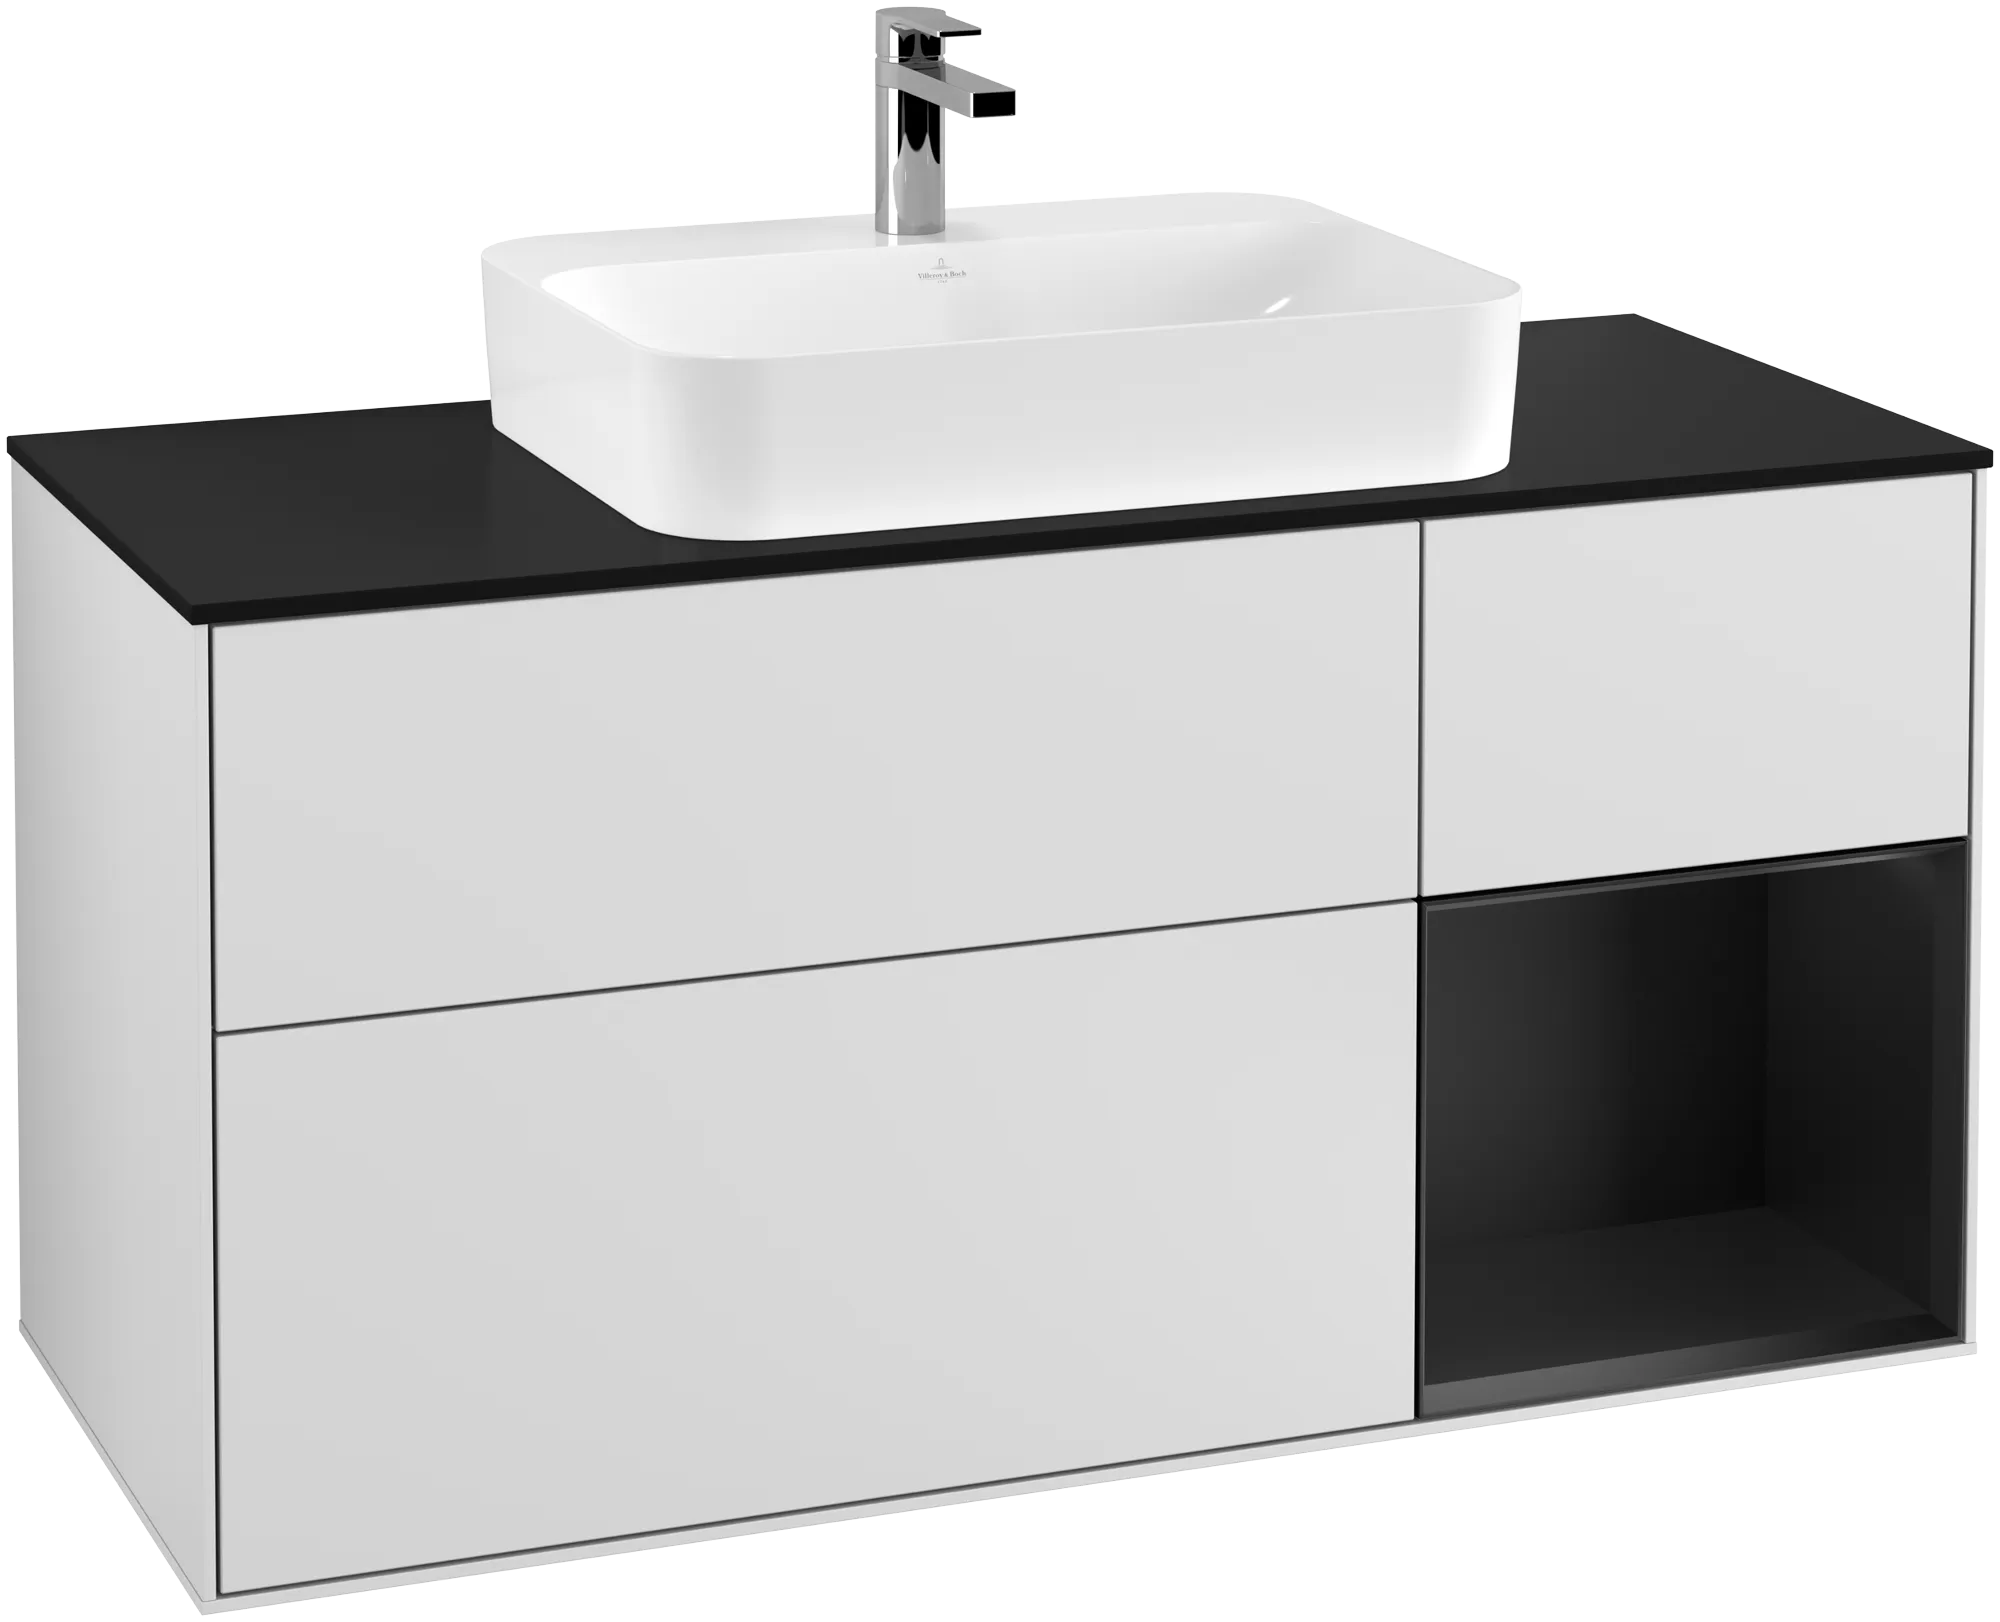 Picture of VILLEROY BOCH Finion Vanity unit, with lighting, 3 pull-out compartments, 1200 x 603 x 501 mm, White Matt Lacquer / Black Matt Lacquer / Glass Black Matt #G422PDMT